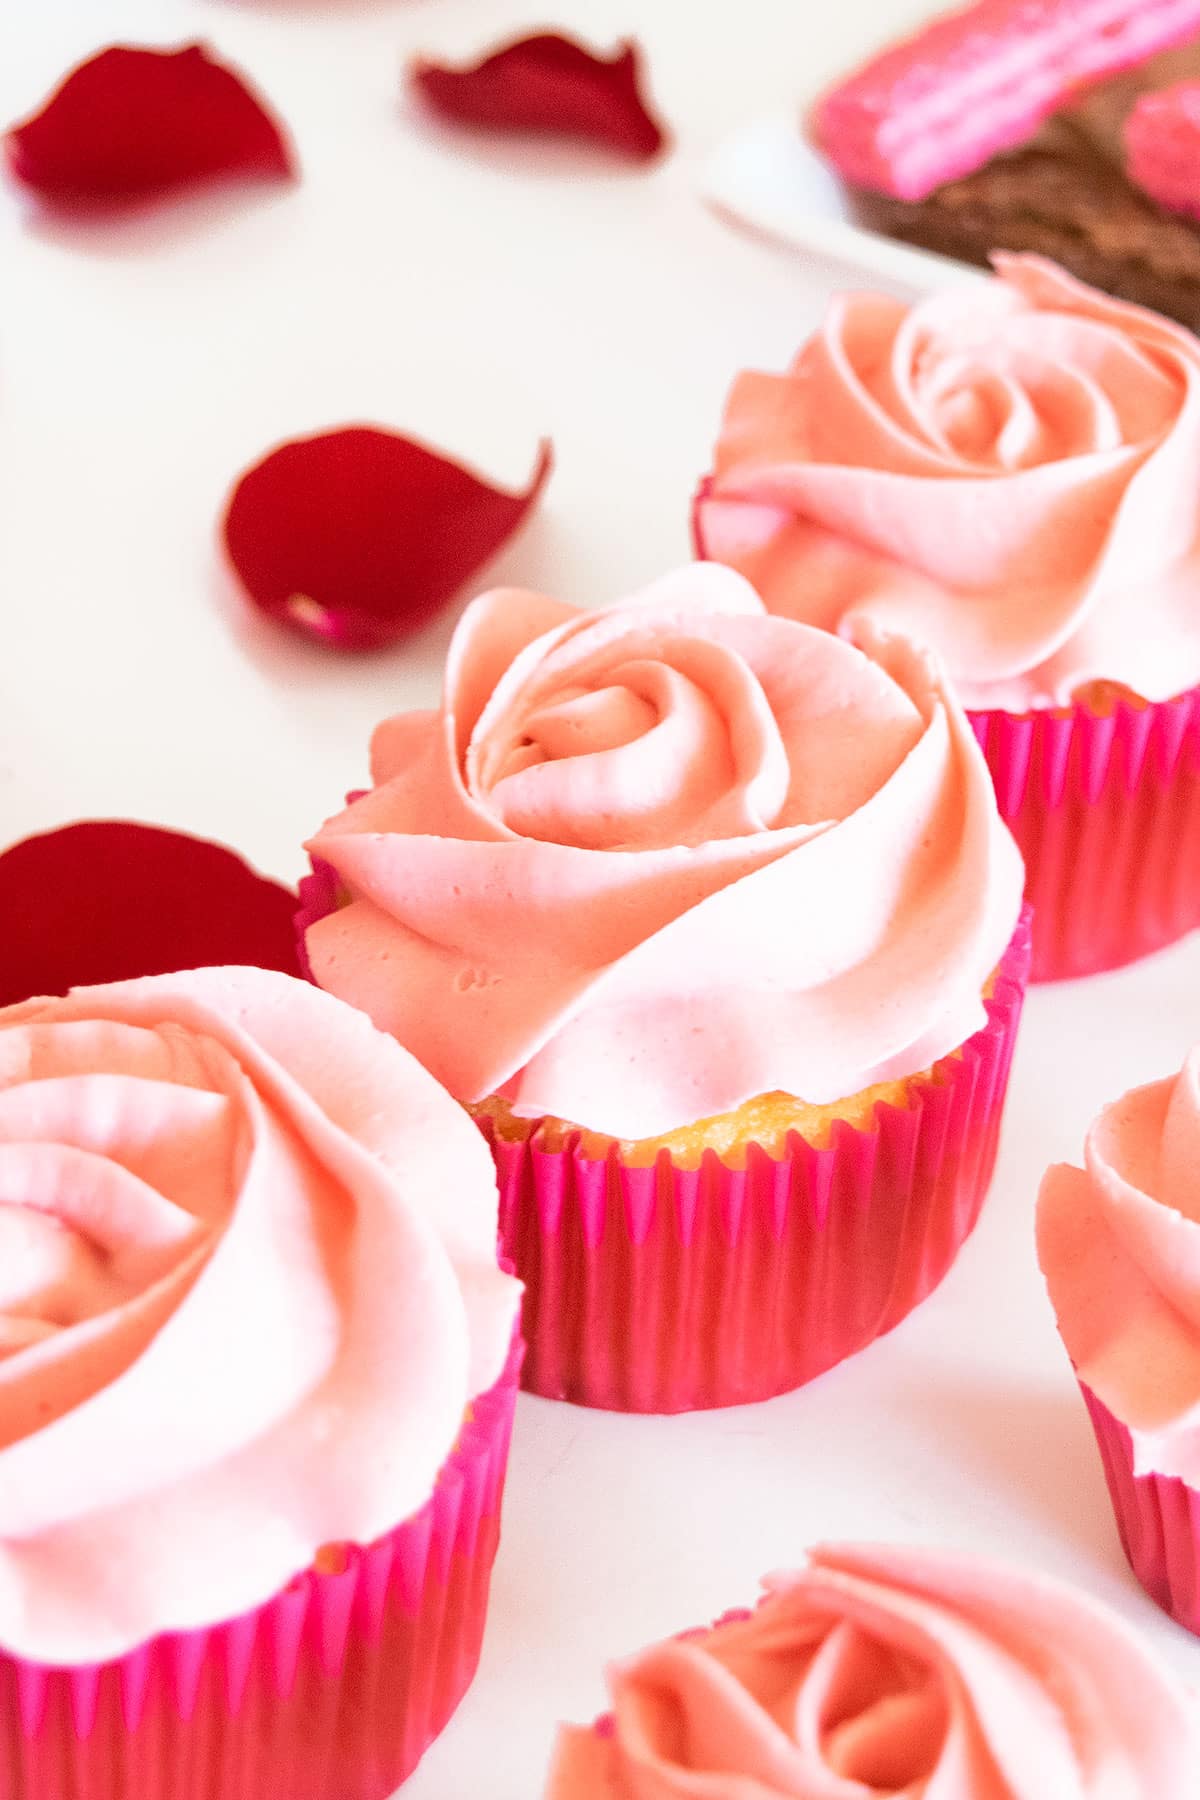 Pink Rose Cupcakes on White Table.